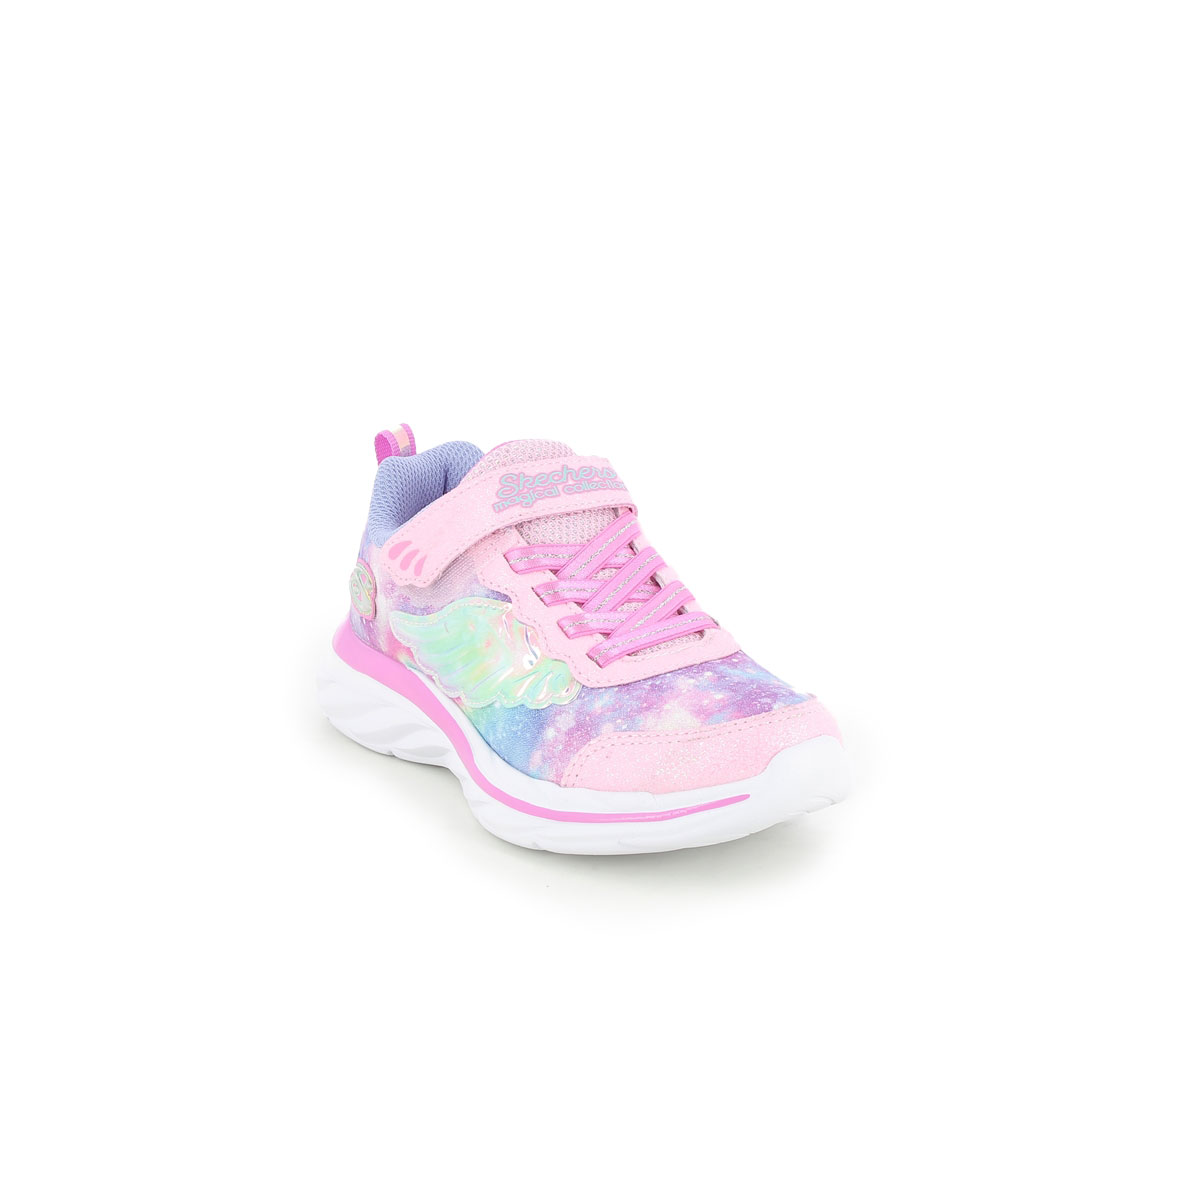 Skechers Flying Beauty Pink Lavender Kids Girls Trainers 302208L In Size 27 In Plain Pink Lavender For kids